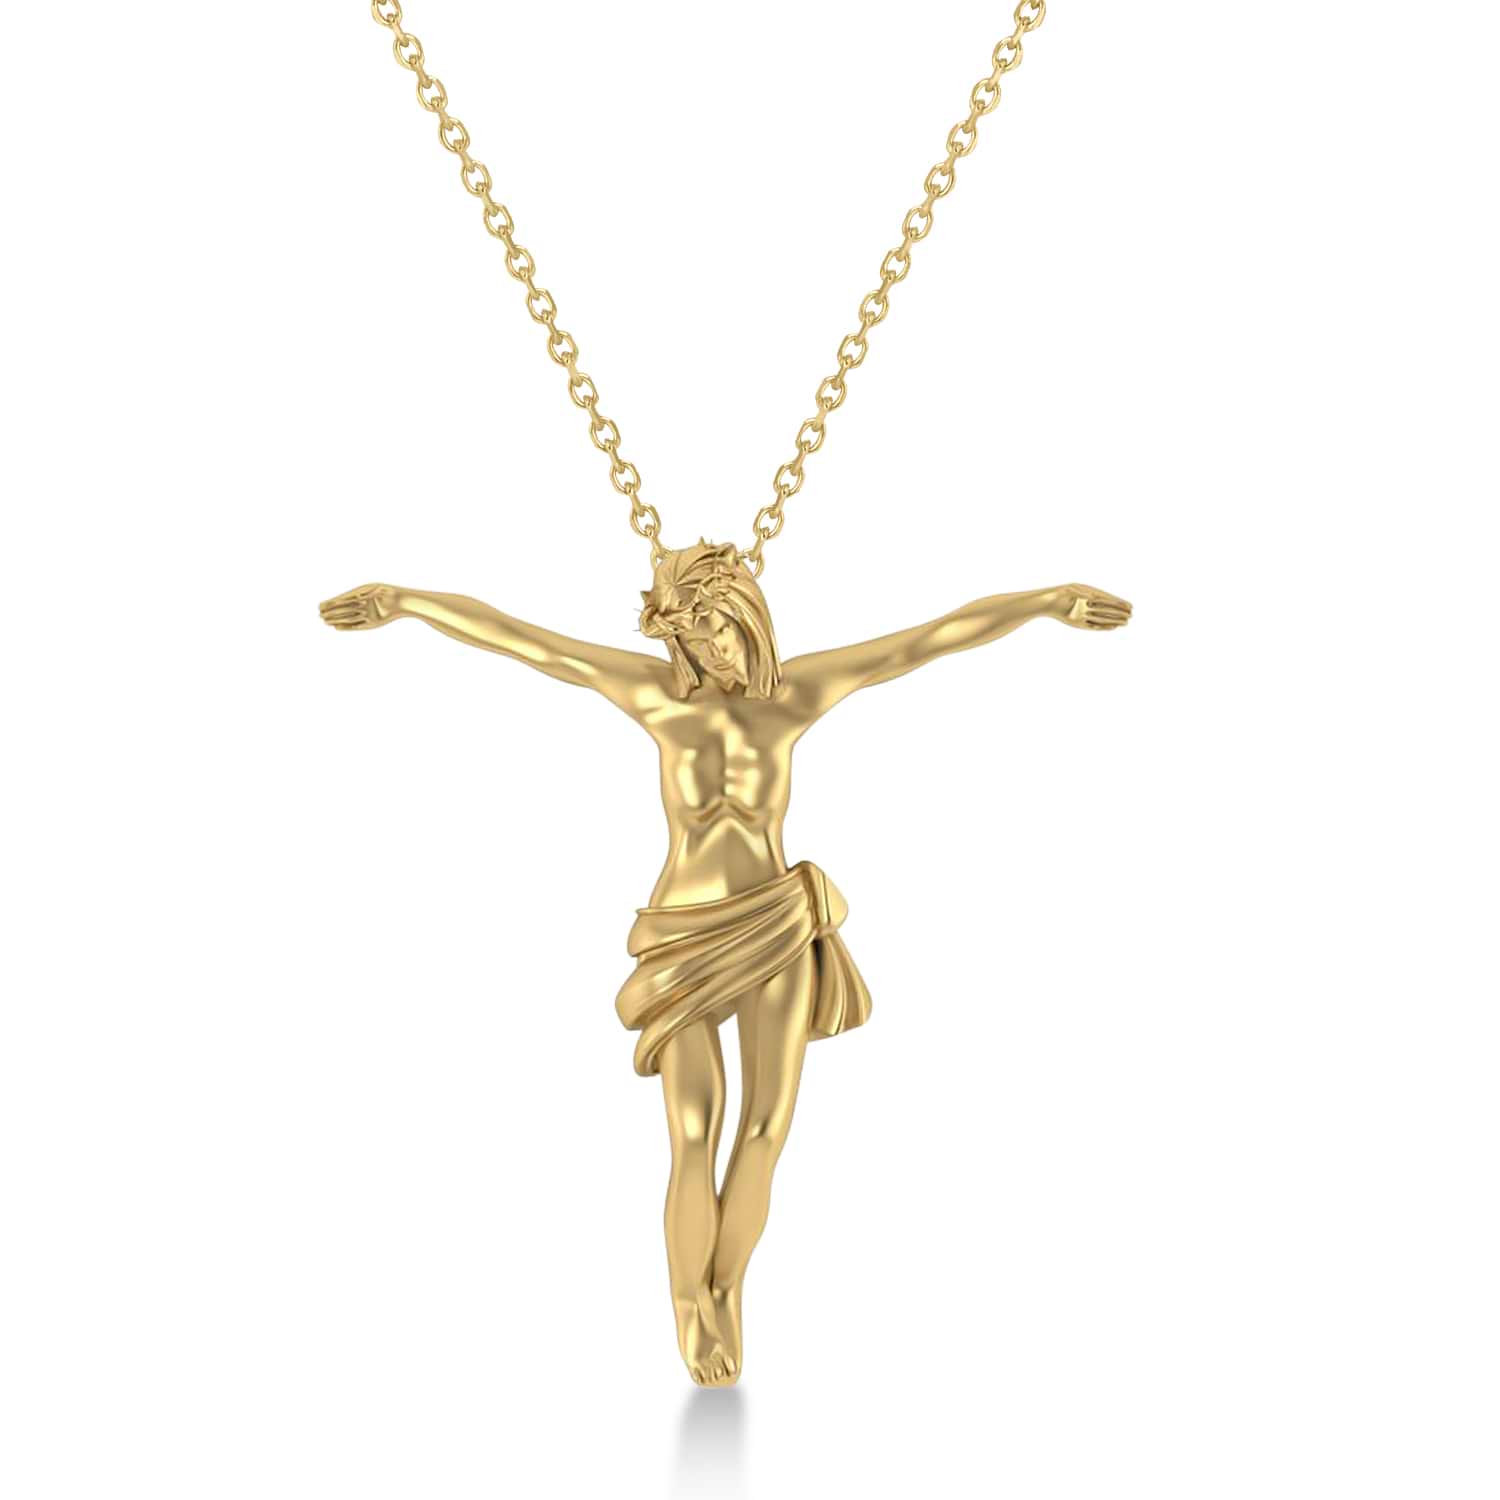 Crucified Jesus Christ Pendant Necklace 14k Yellow Gold